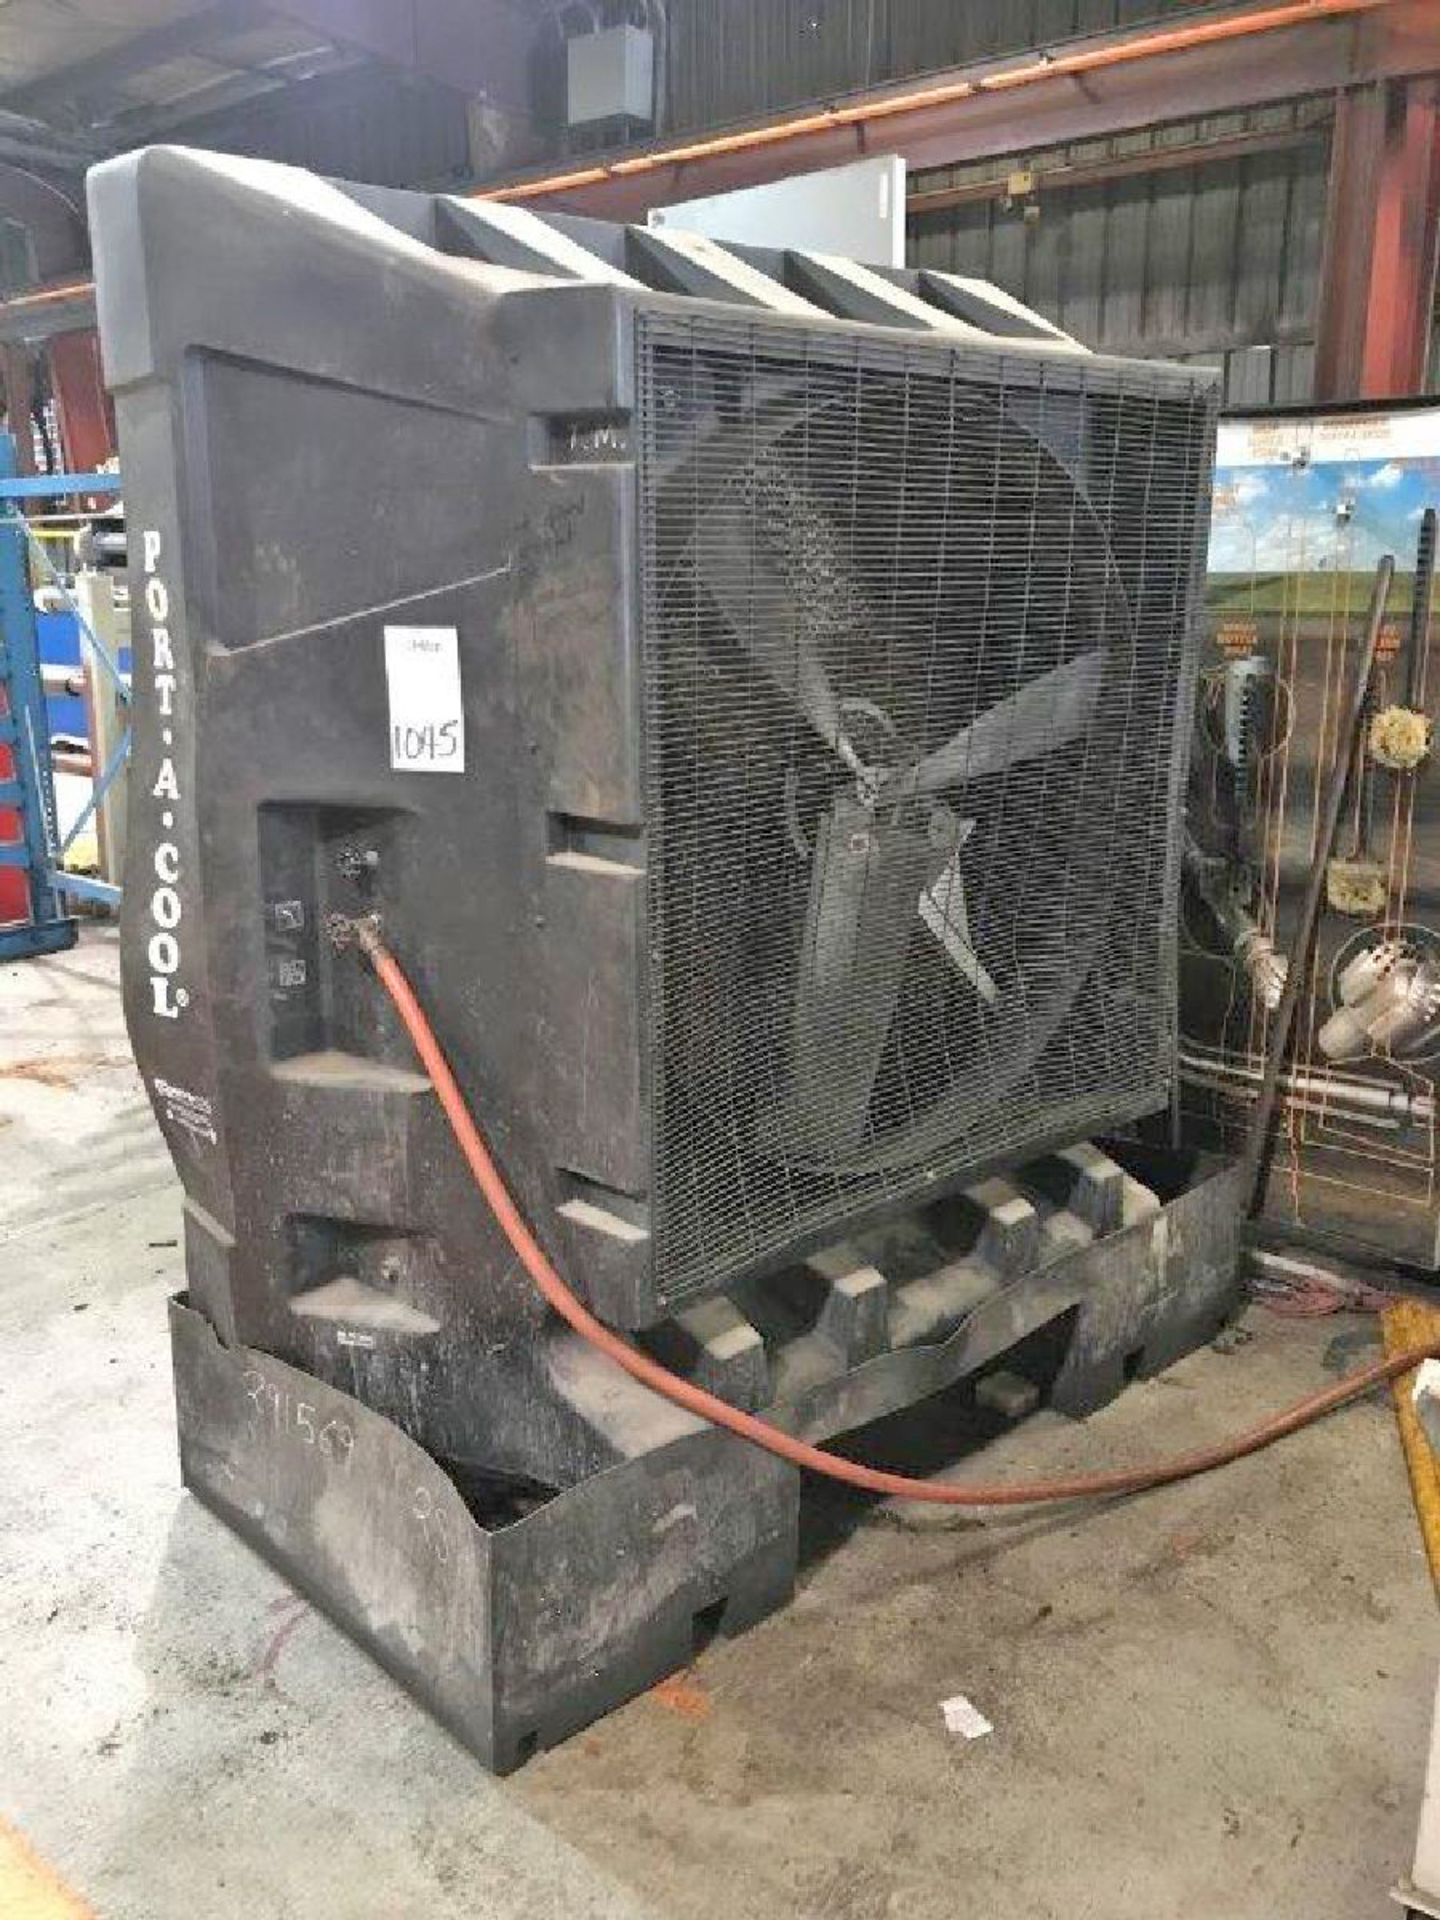 Port-A-Cool Model PAC2K482S 48", 2000 CFM, 2-Speed Portable Evaporative Cooler - Image 2 of 2